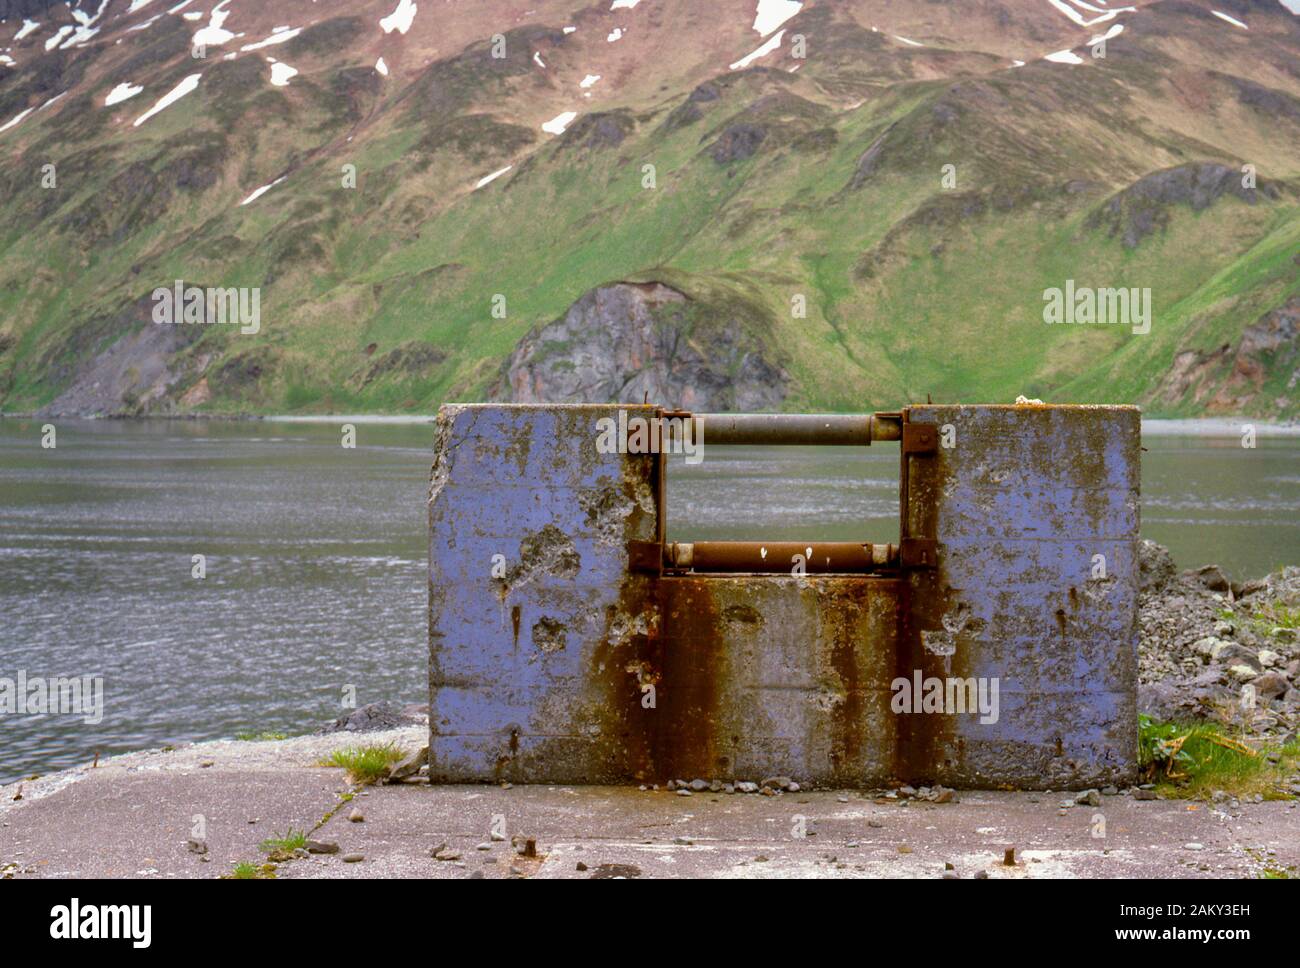 Bunkers & gun emplacements left from WWII, to fend off Japanese invasion of Dutch Harbor, Aleutian Islands Alaska. Stock Photo